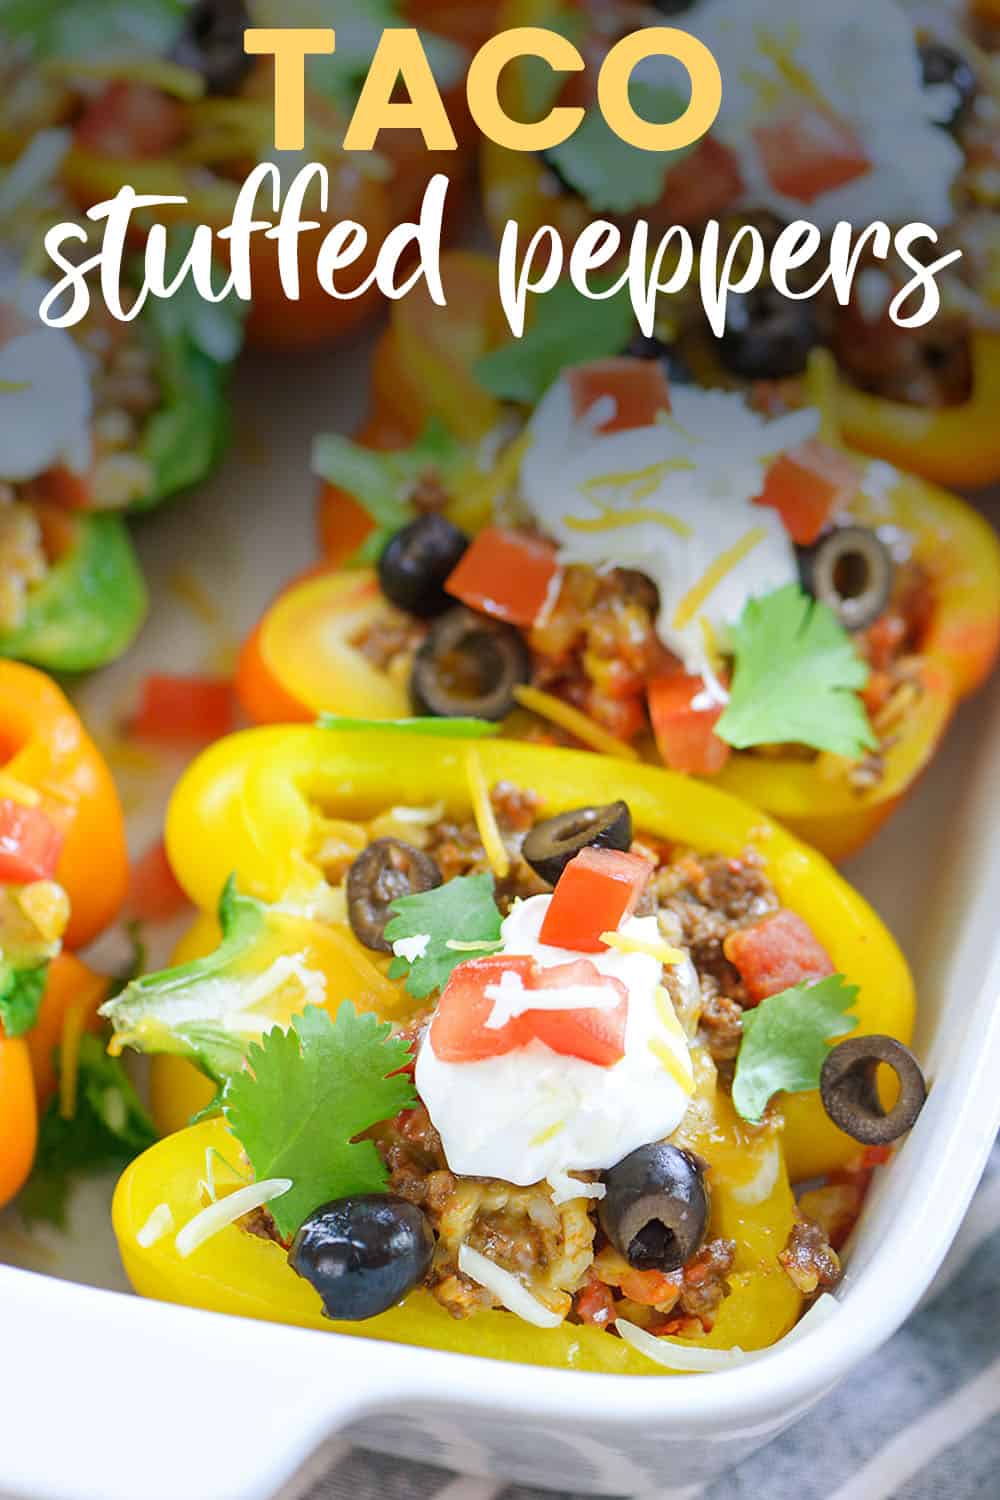 taco stuffed peppers in white baking dish with text for Pinterest.